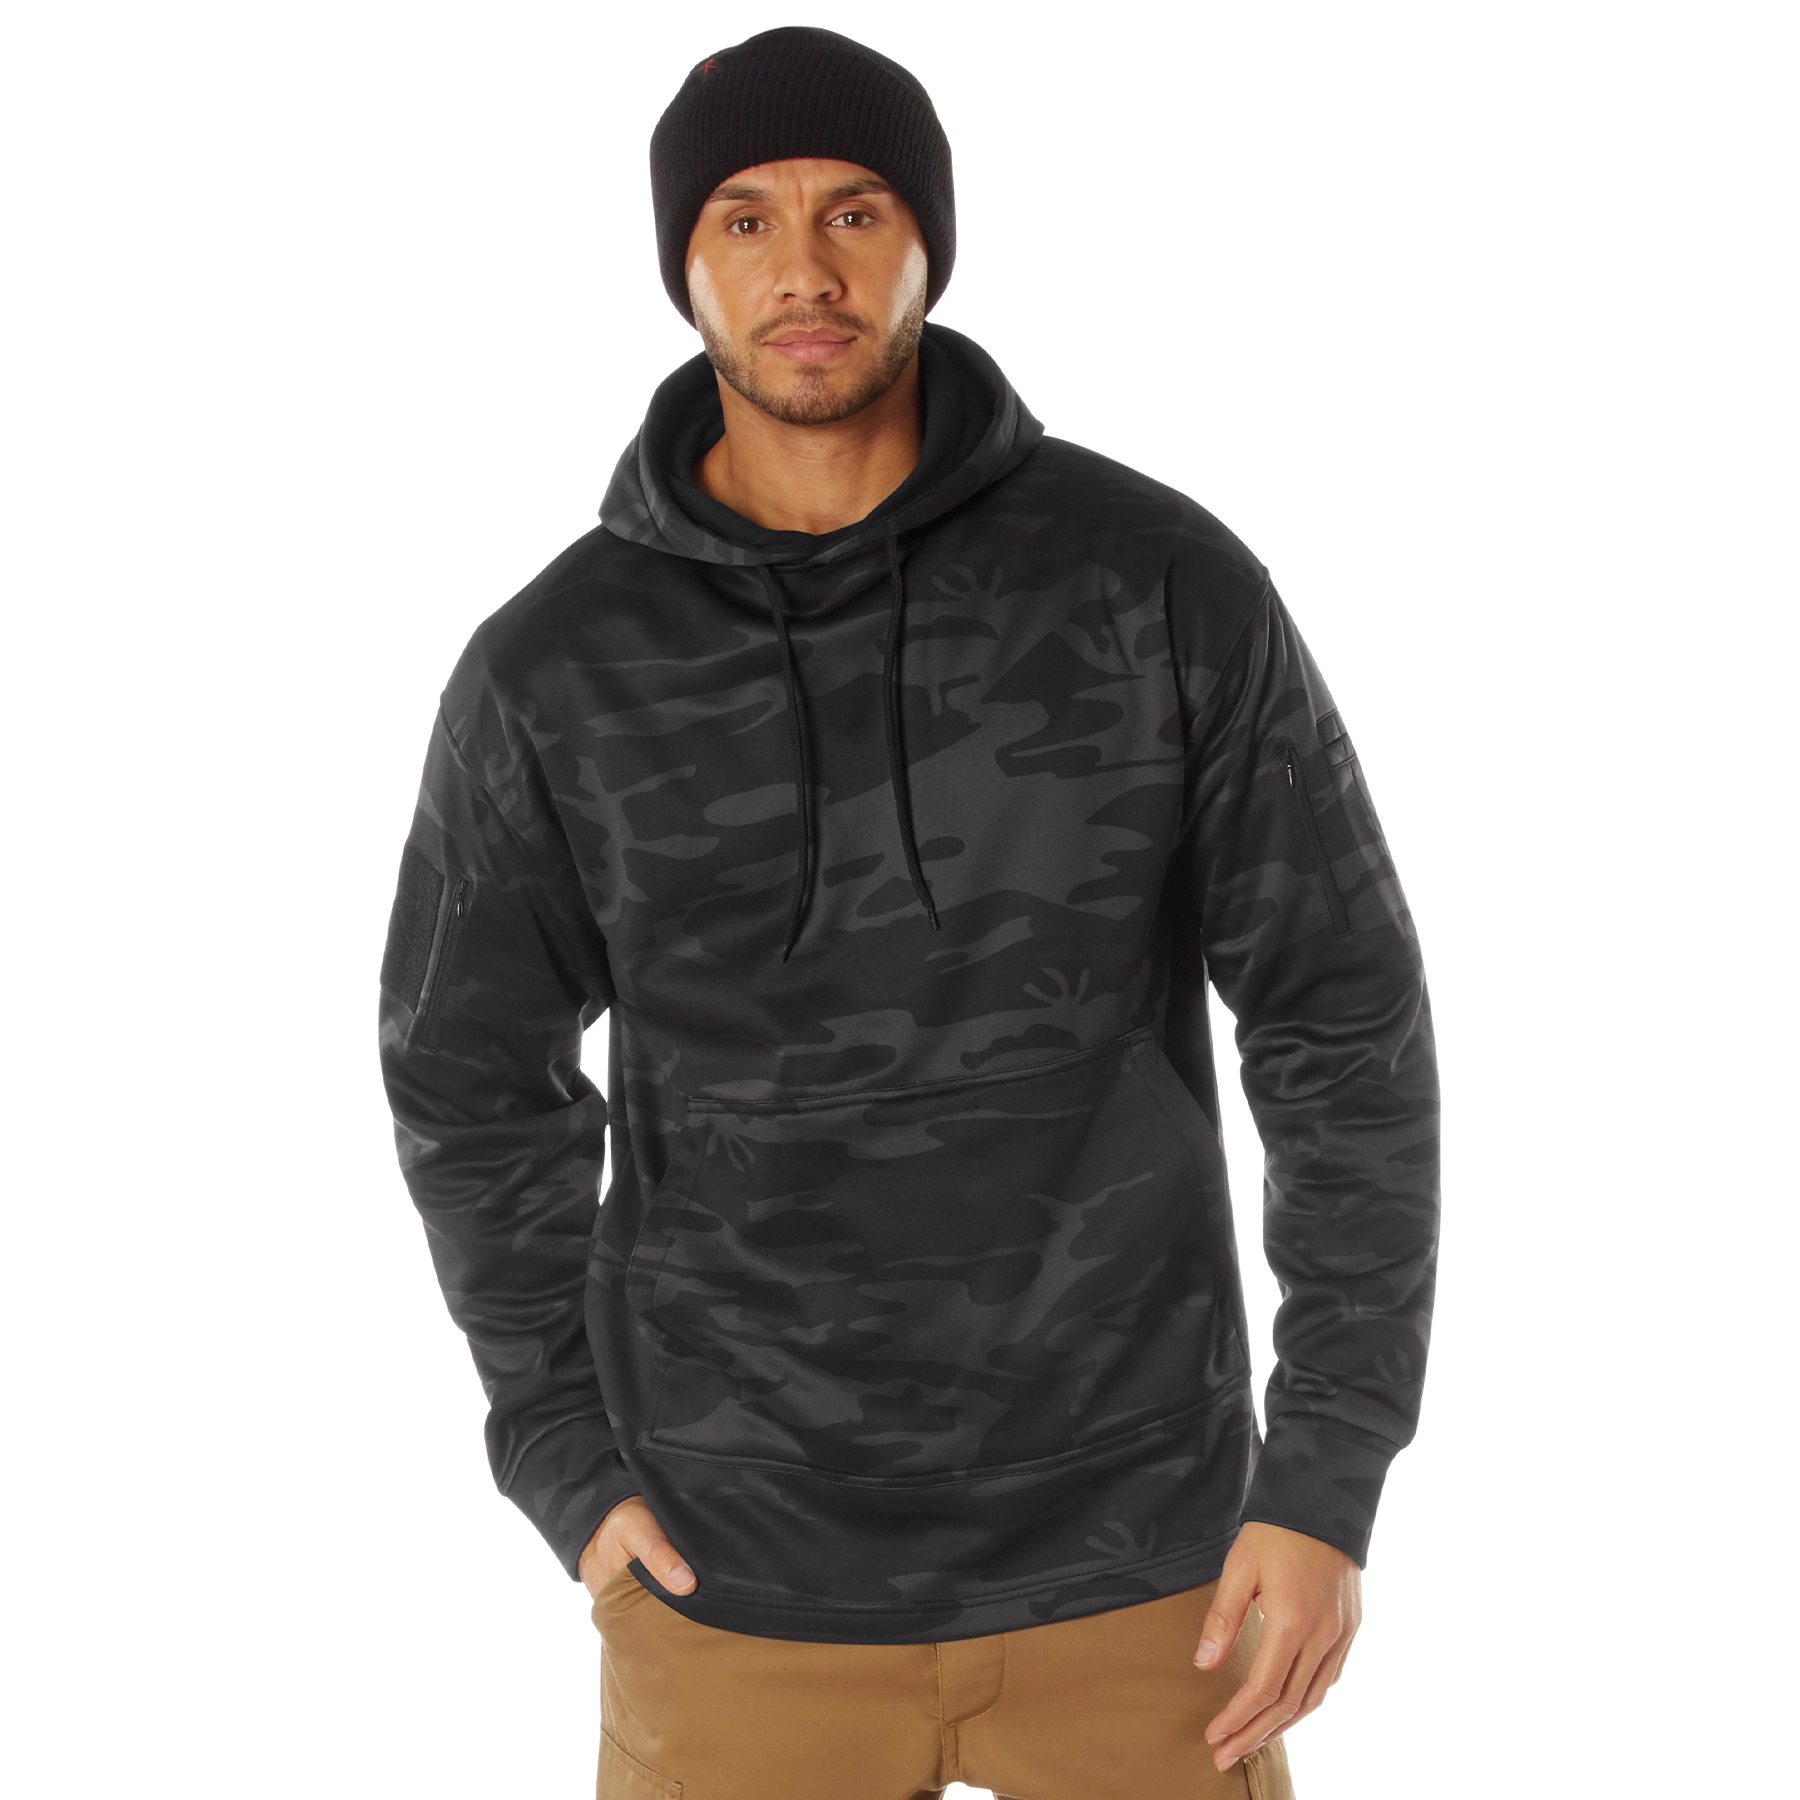 Rothco Midnight Woodland Camo Concealed Carry Sweatshirt